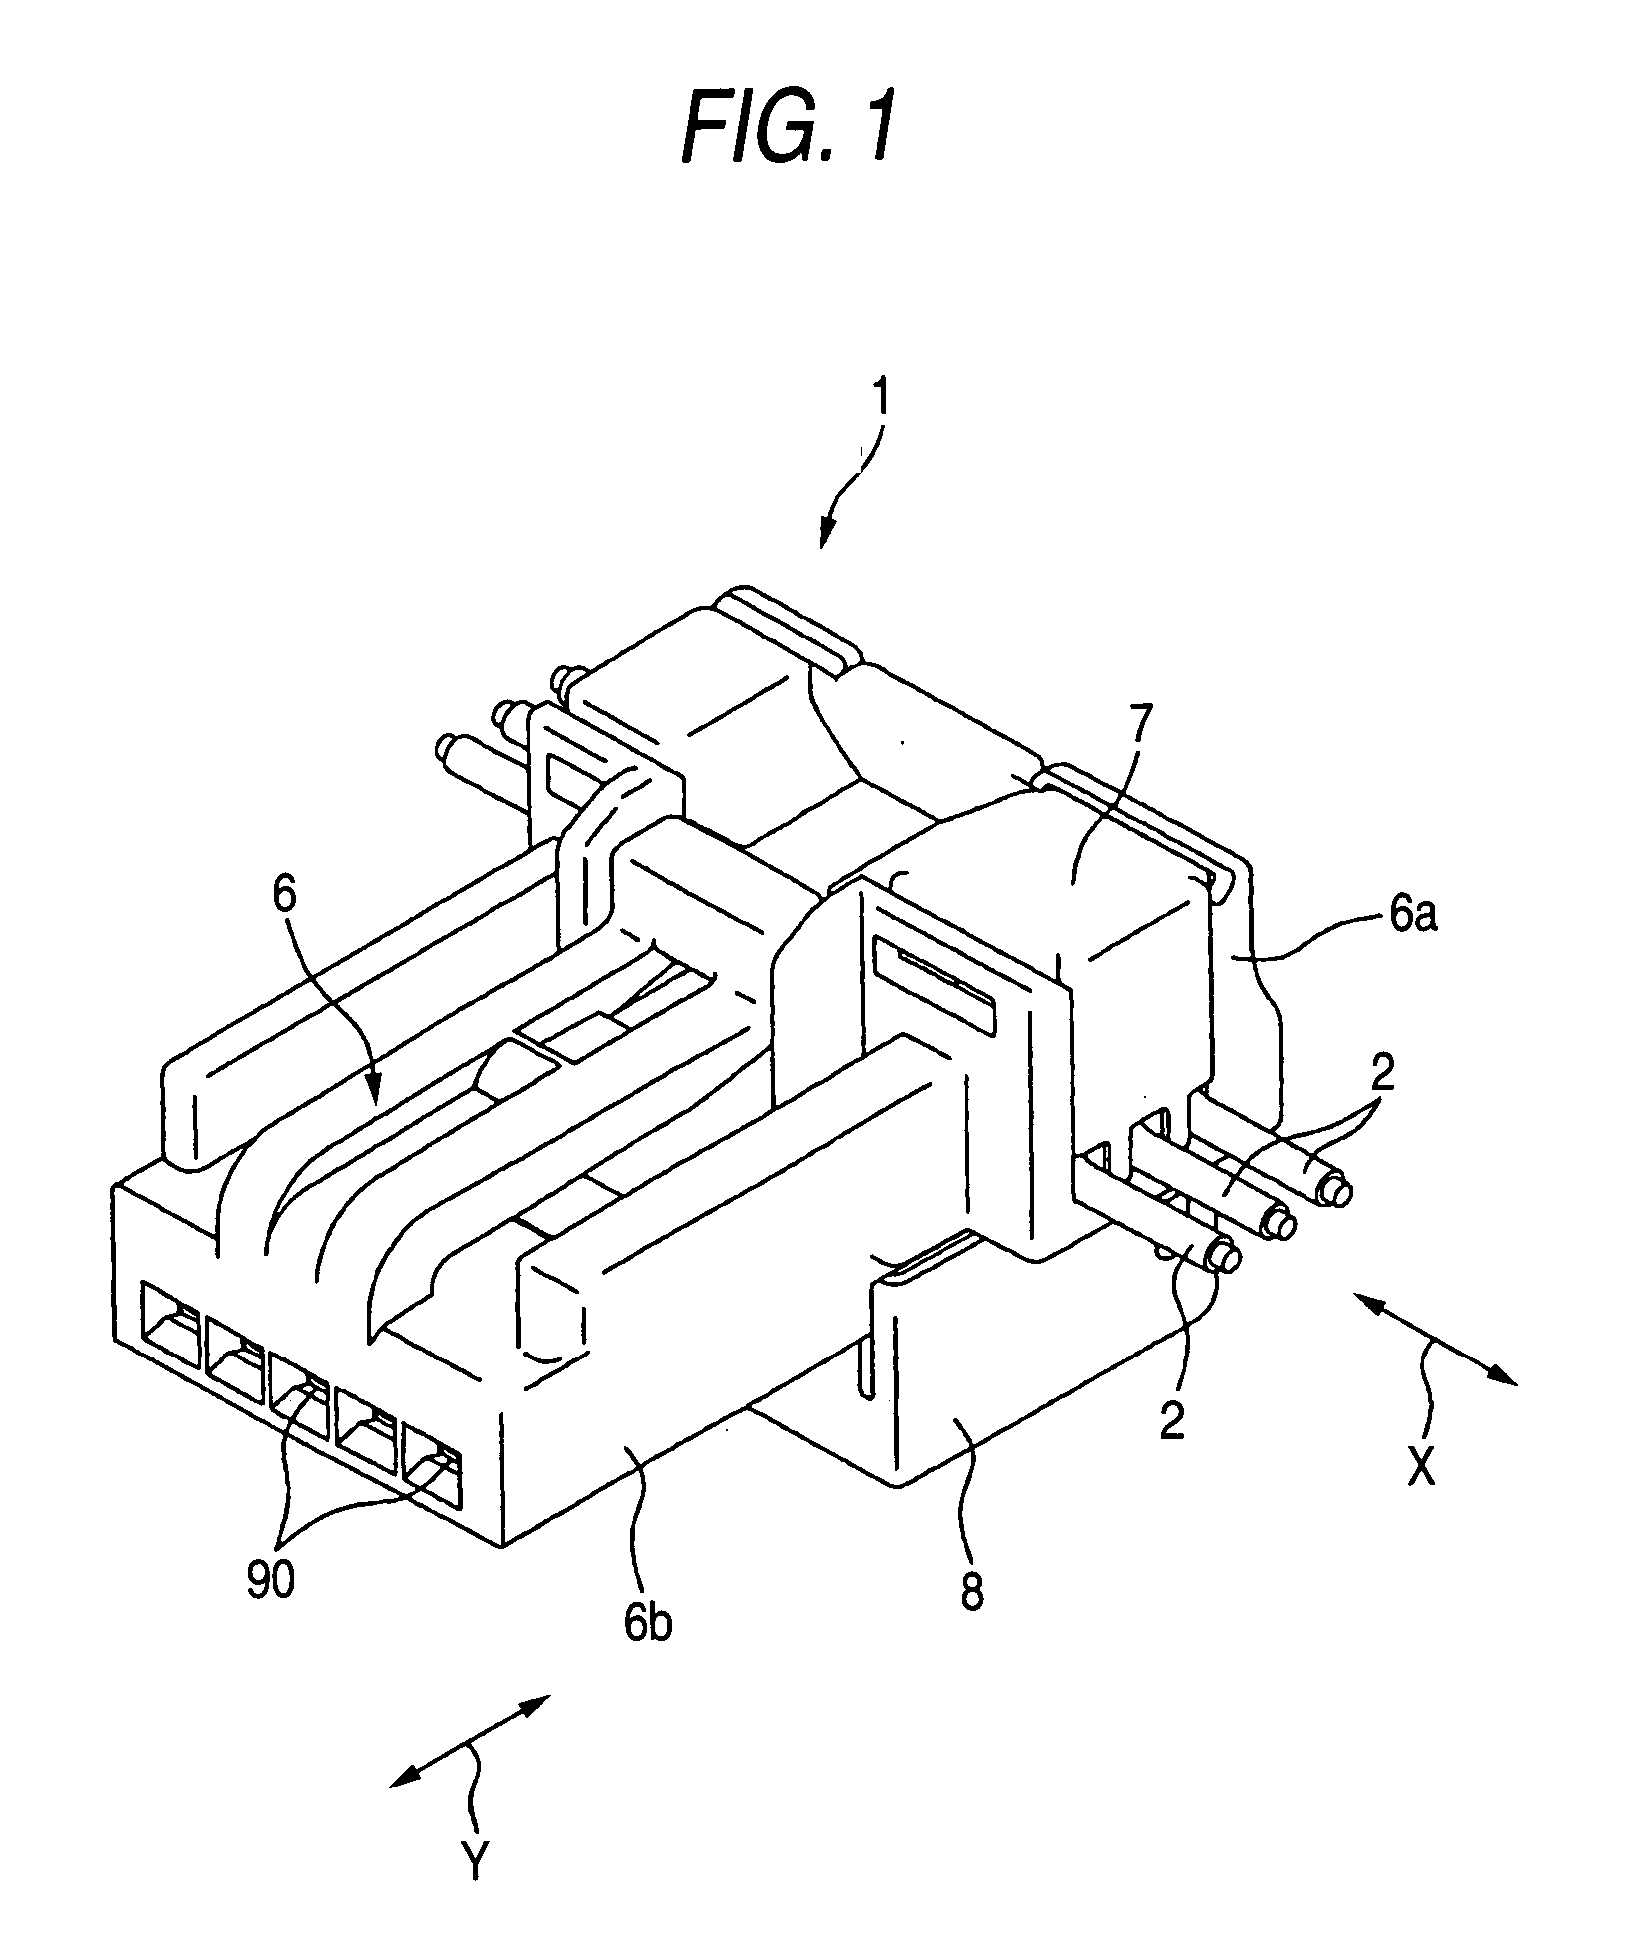 Press-contact connector built in substrate